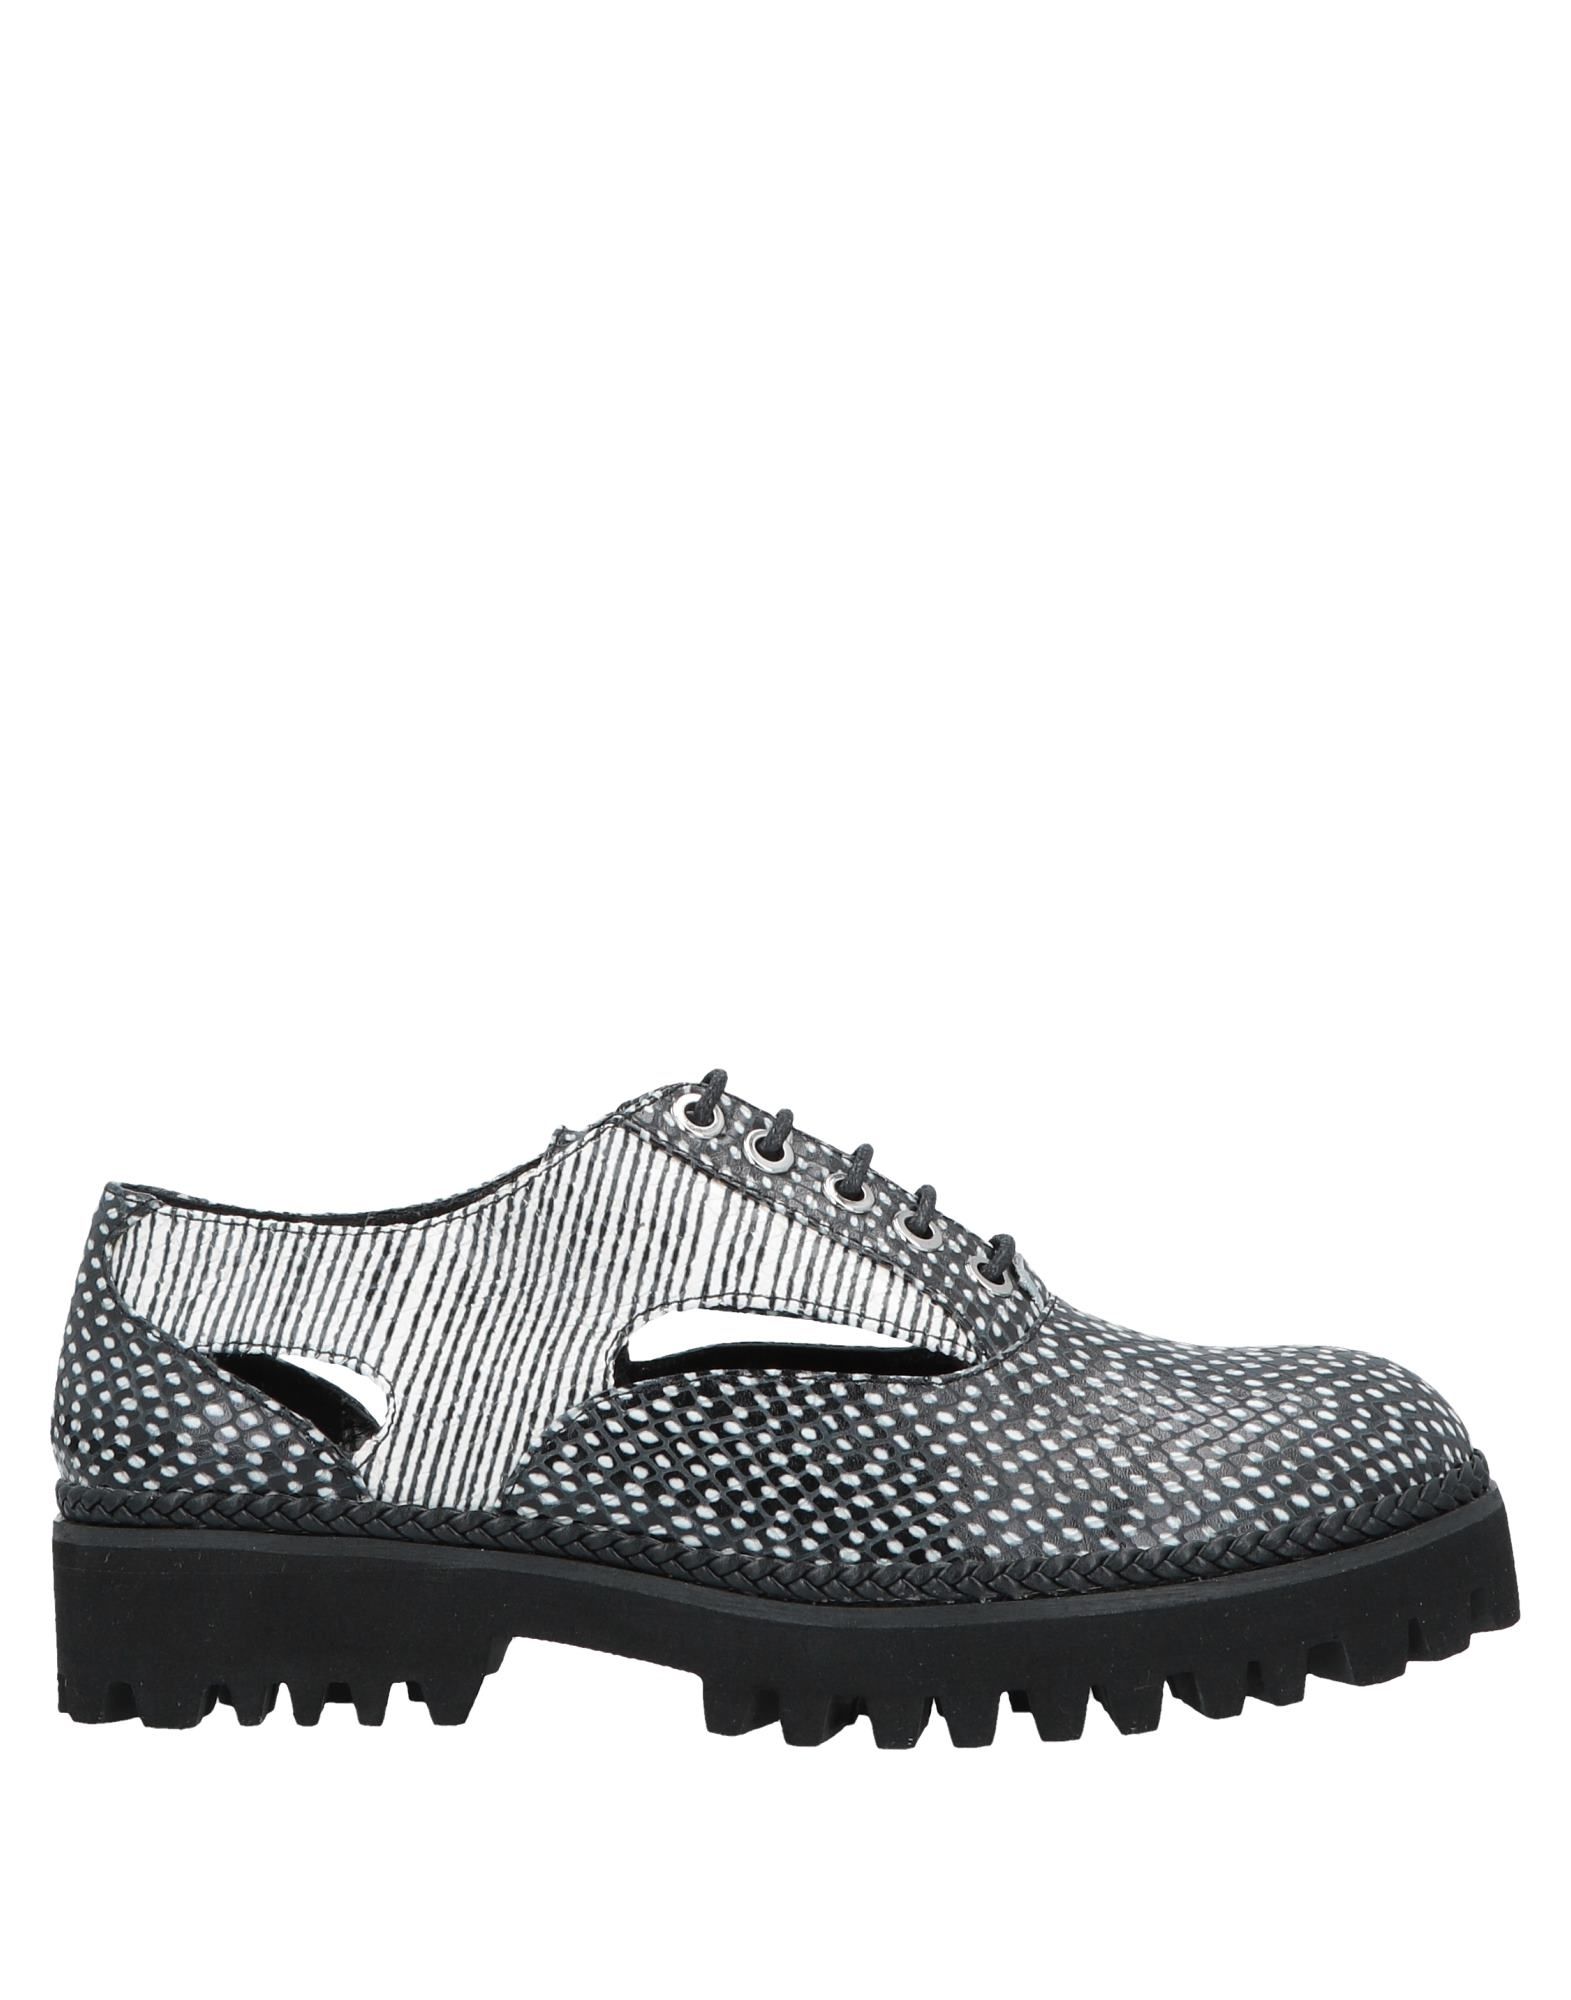 SCERVINO STREET Laced shoes,11670876FP 7